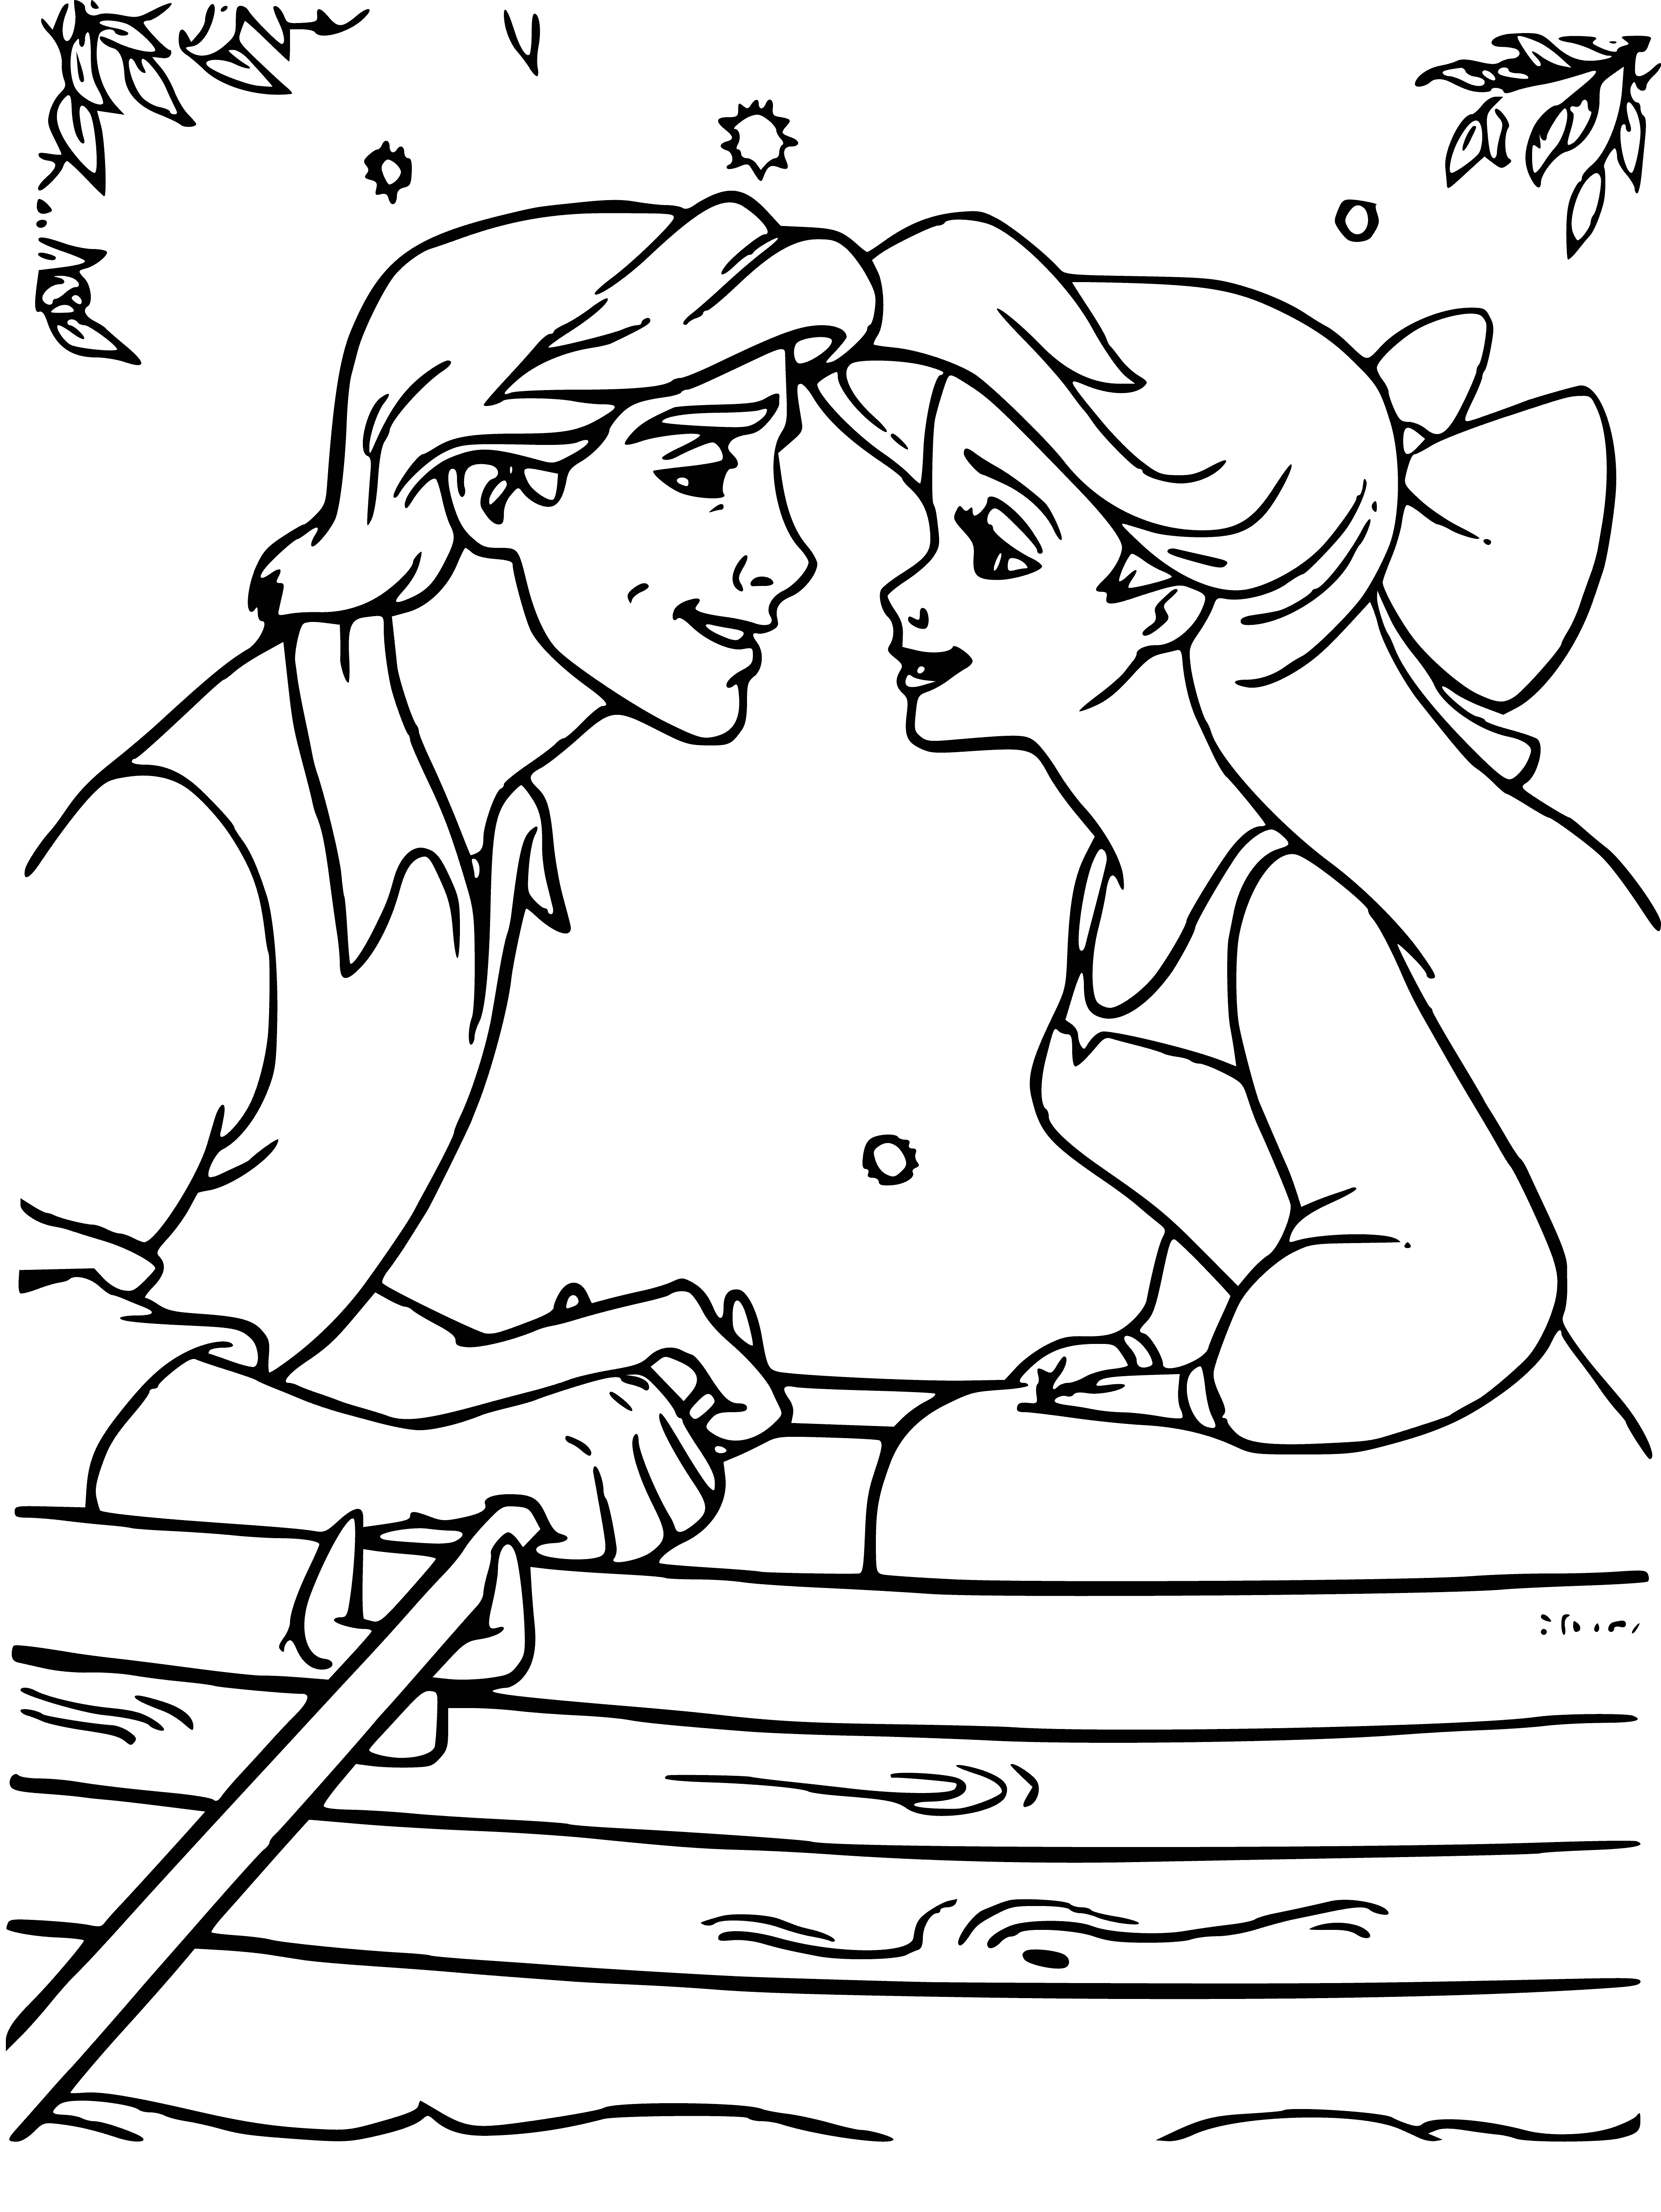 Kiss until dawn coloring page